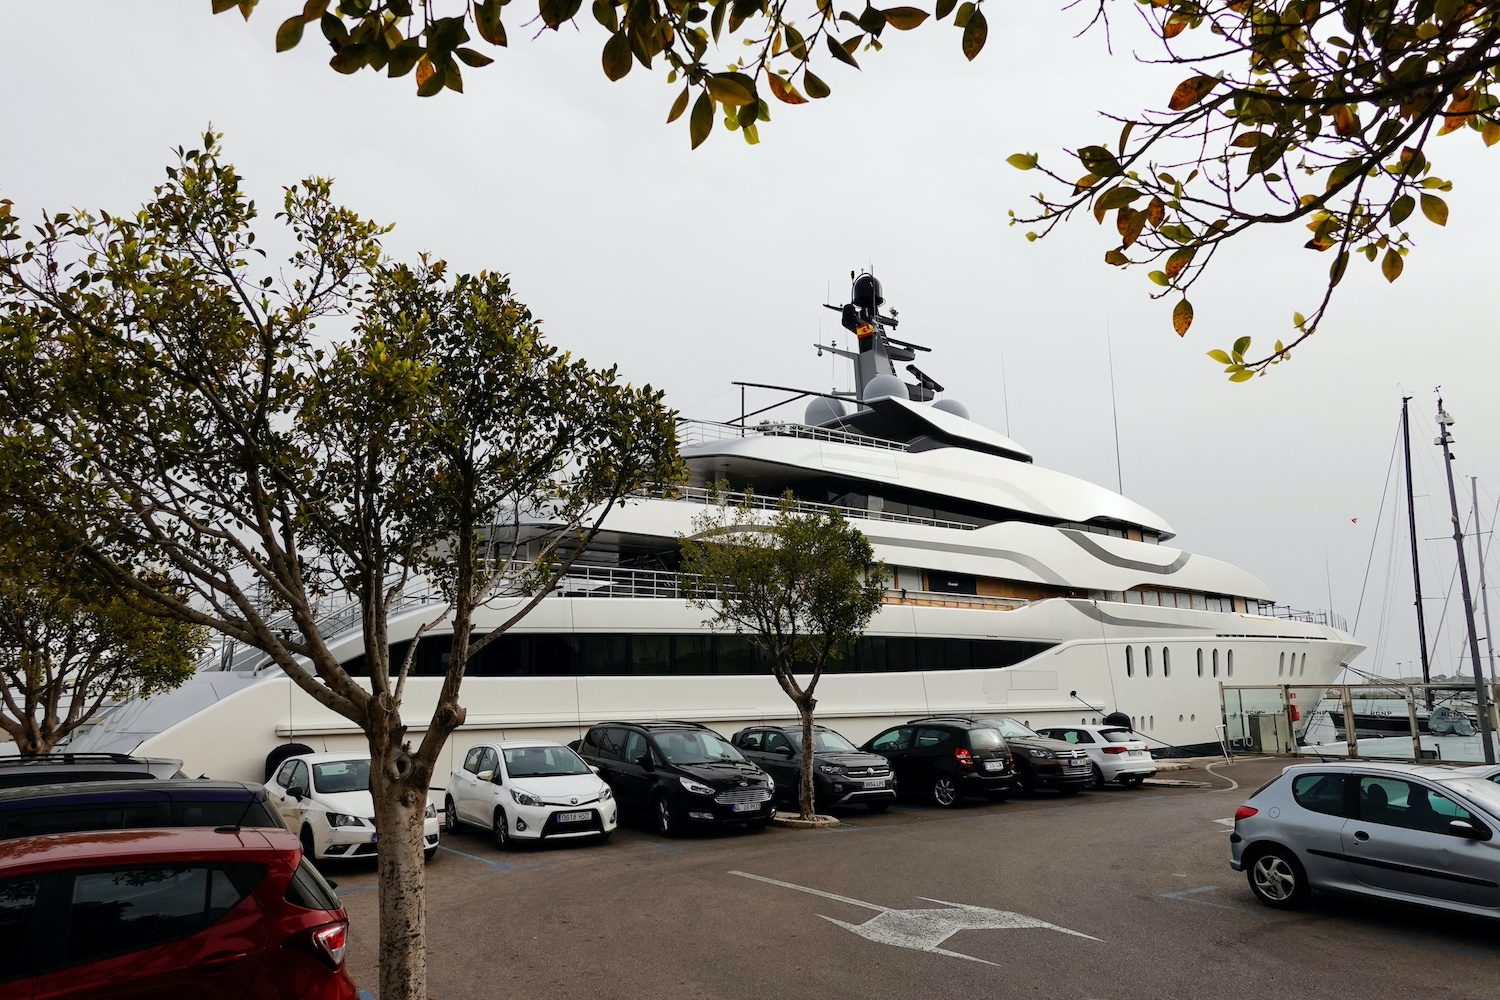 Spanish police impound superyacht owned by oligarch Vekselberg